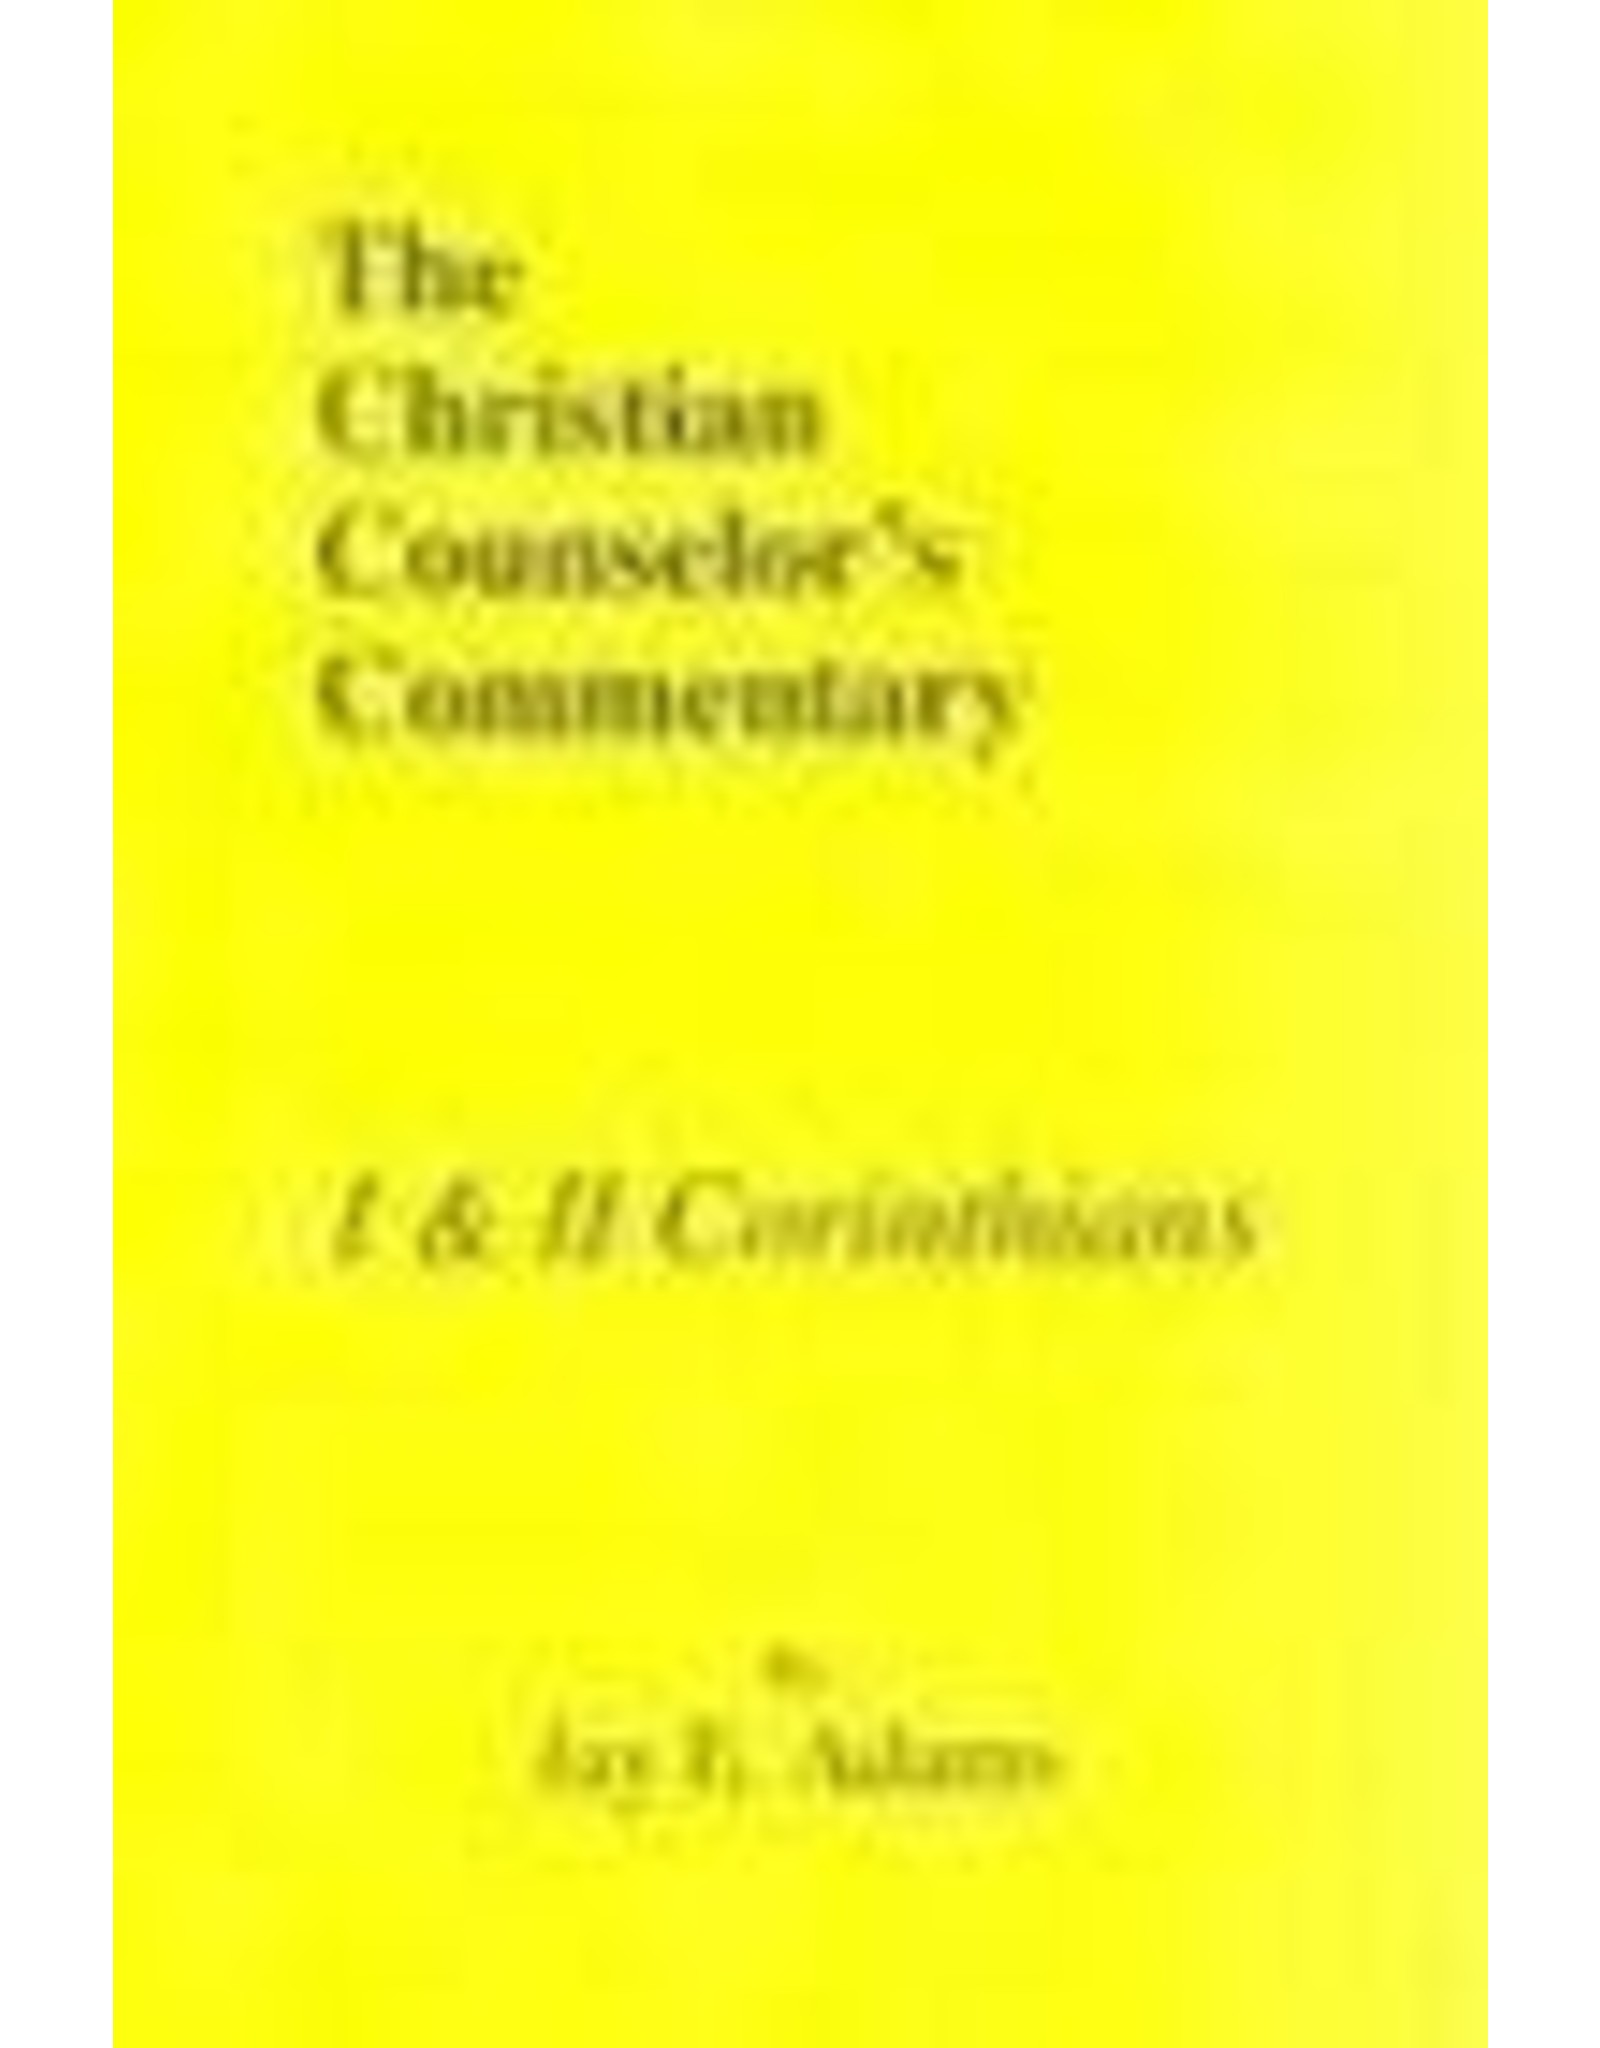 Jay E Adams The Christian Counselor's Commentary: 1, 2 Corinthians